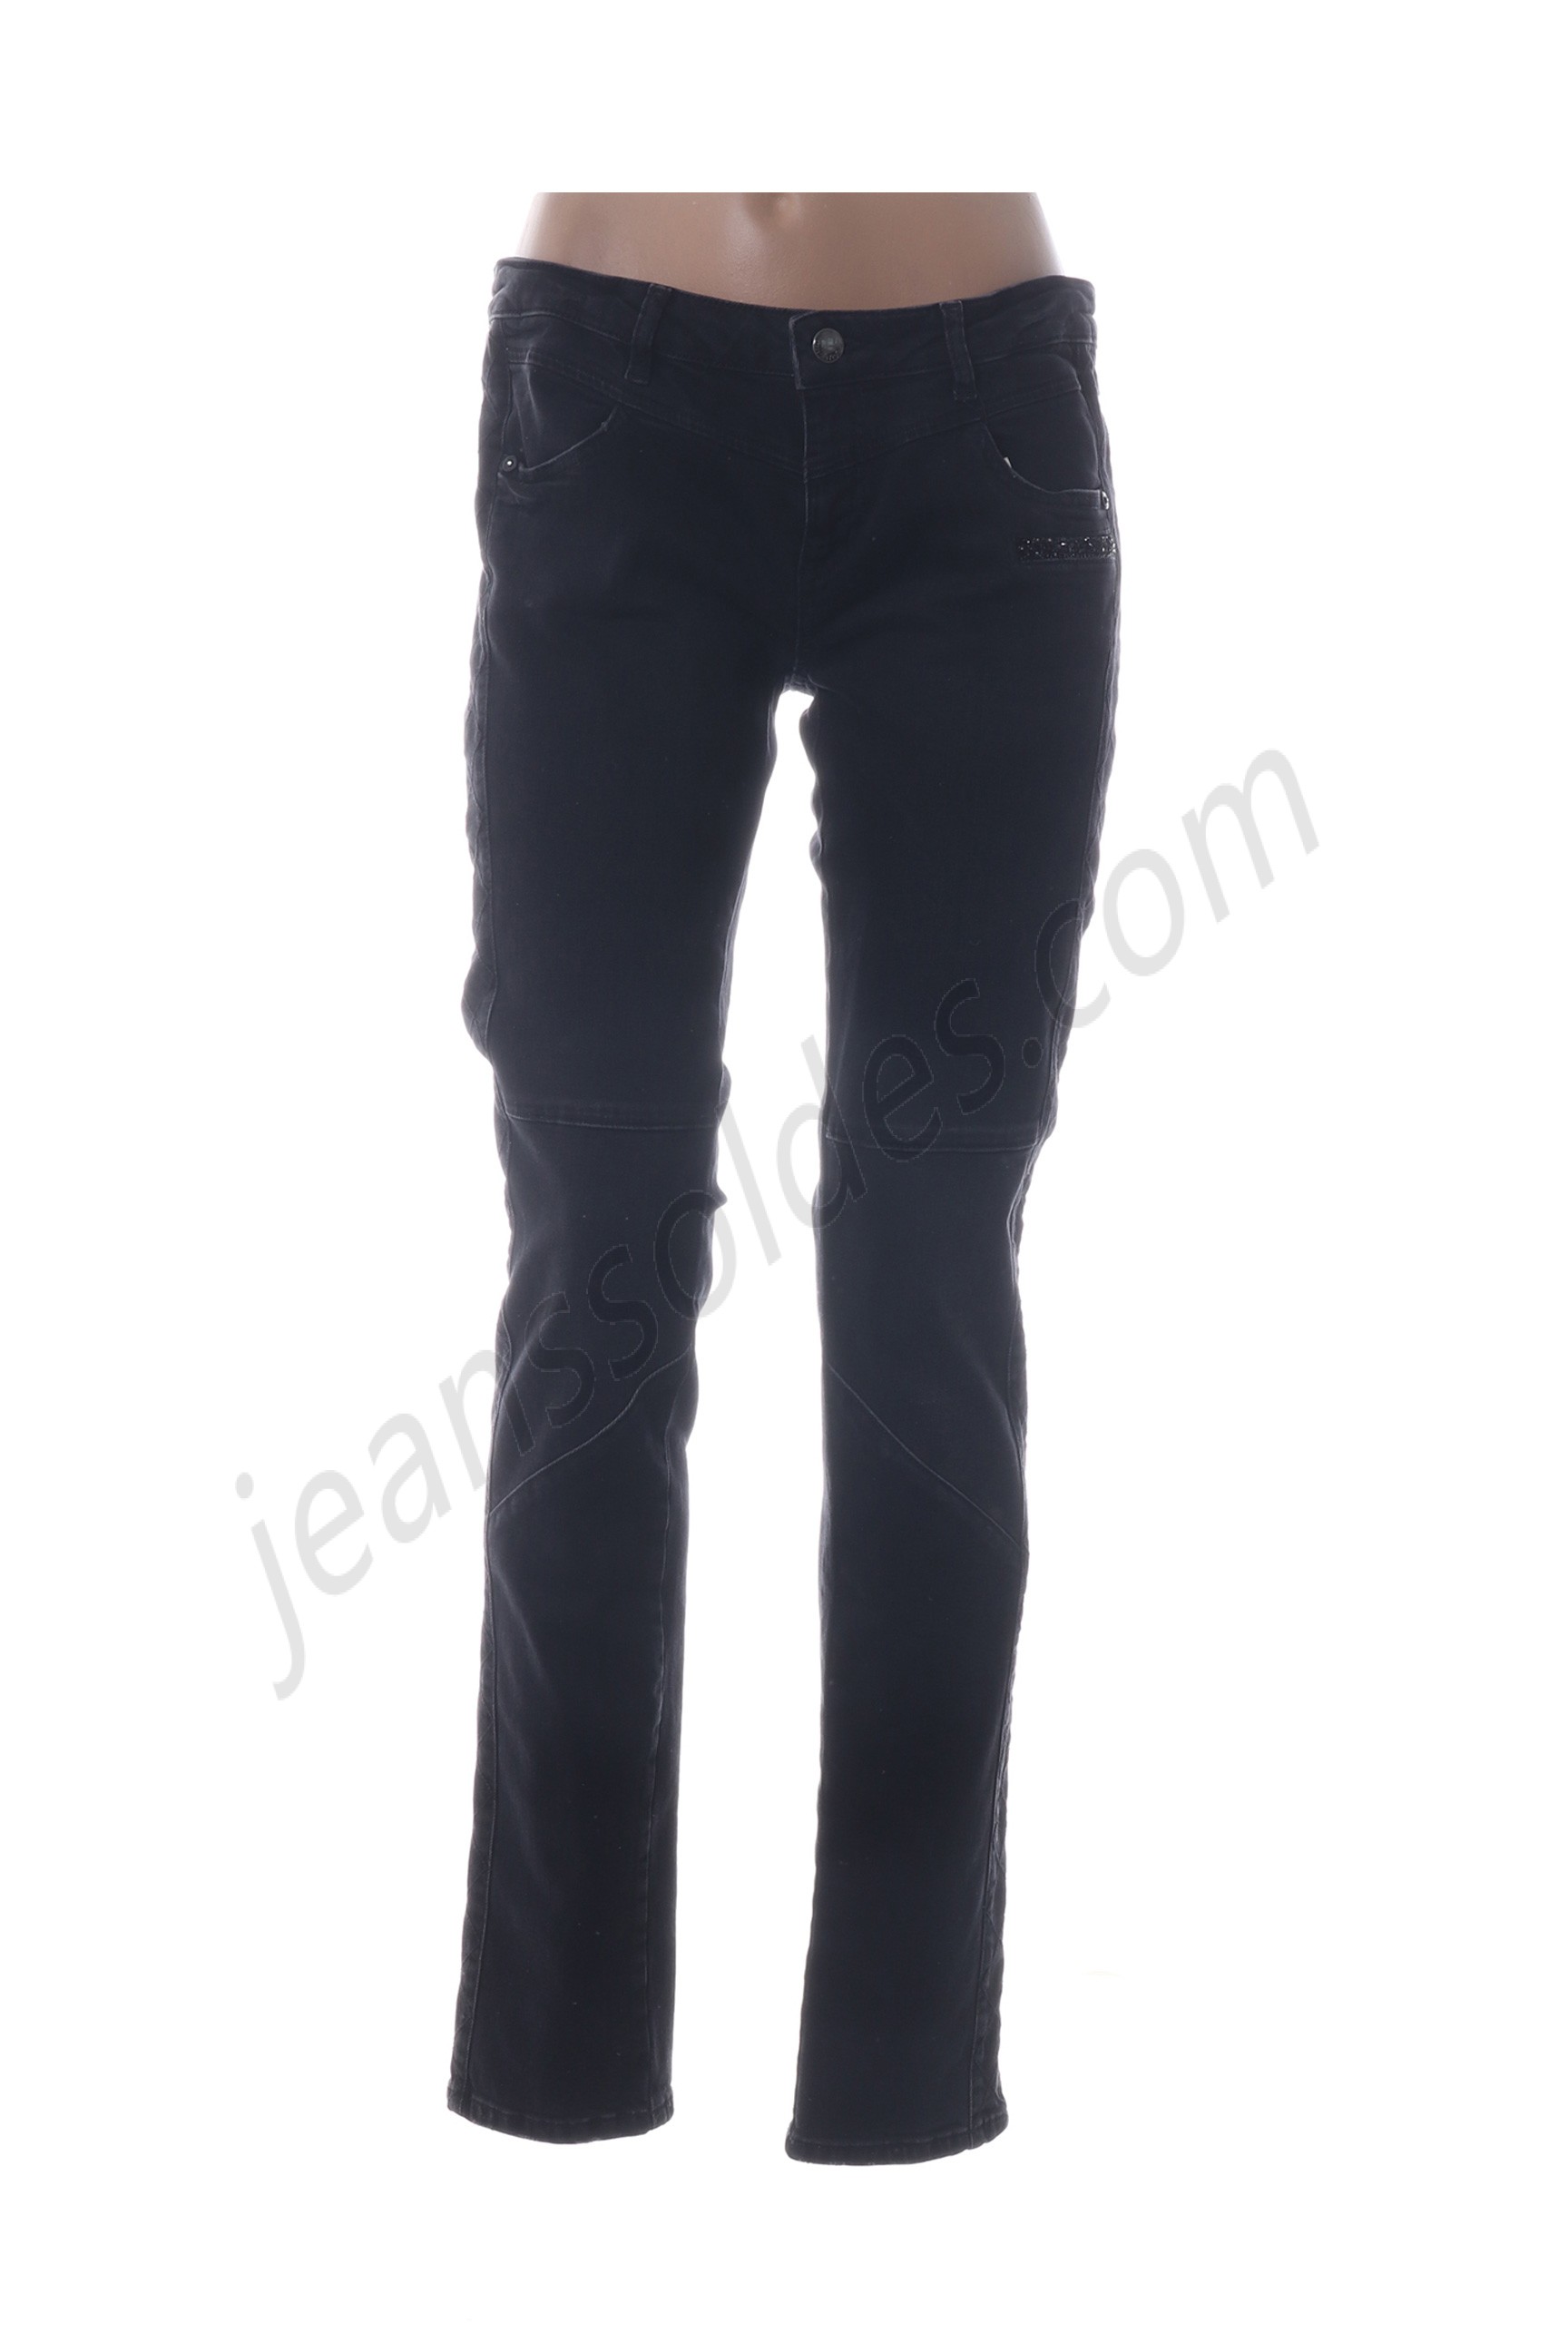 one step-Jeans coupe slim prix d’amis - one step-Jeans coupe slim prix d’amis